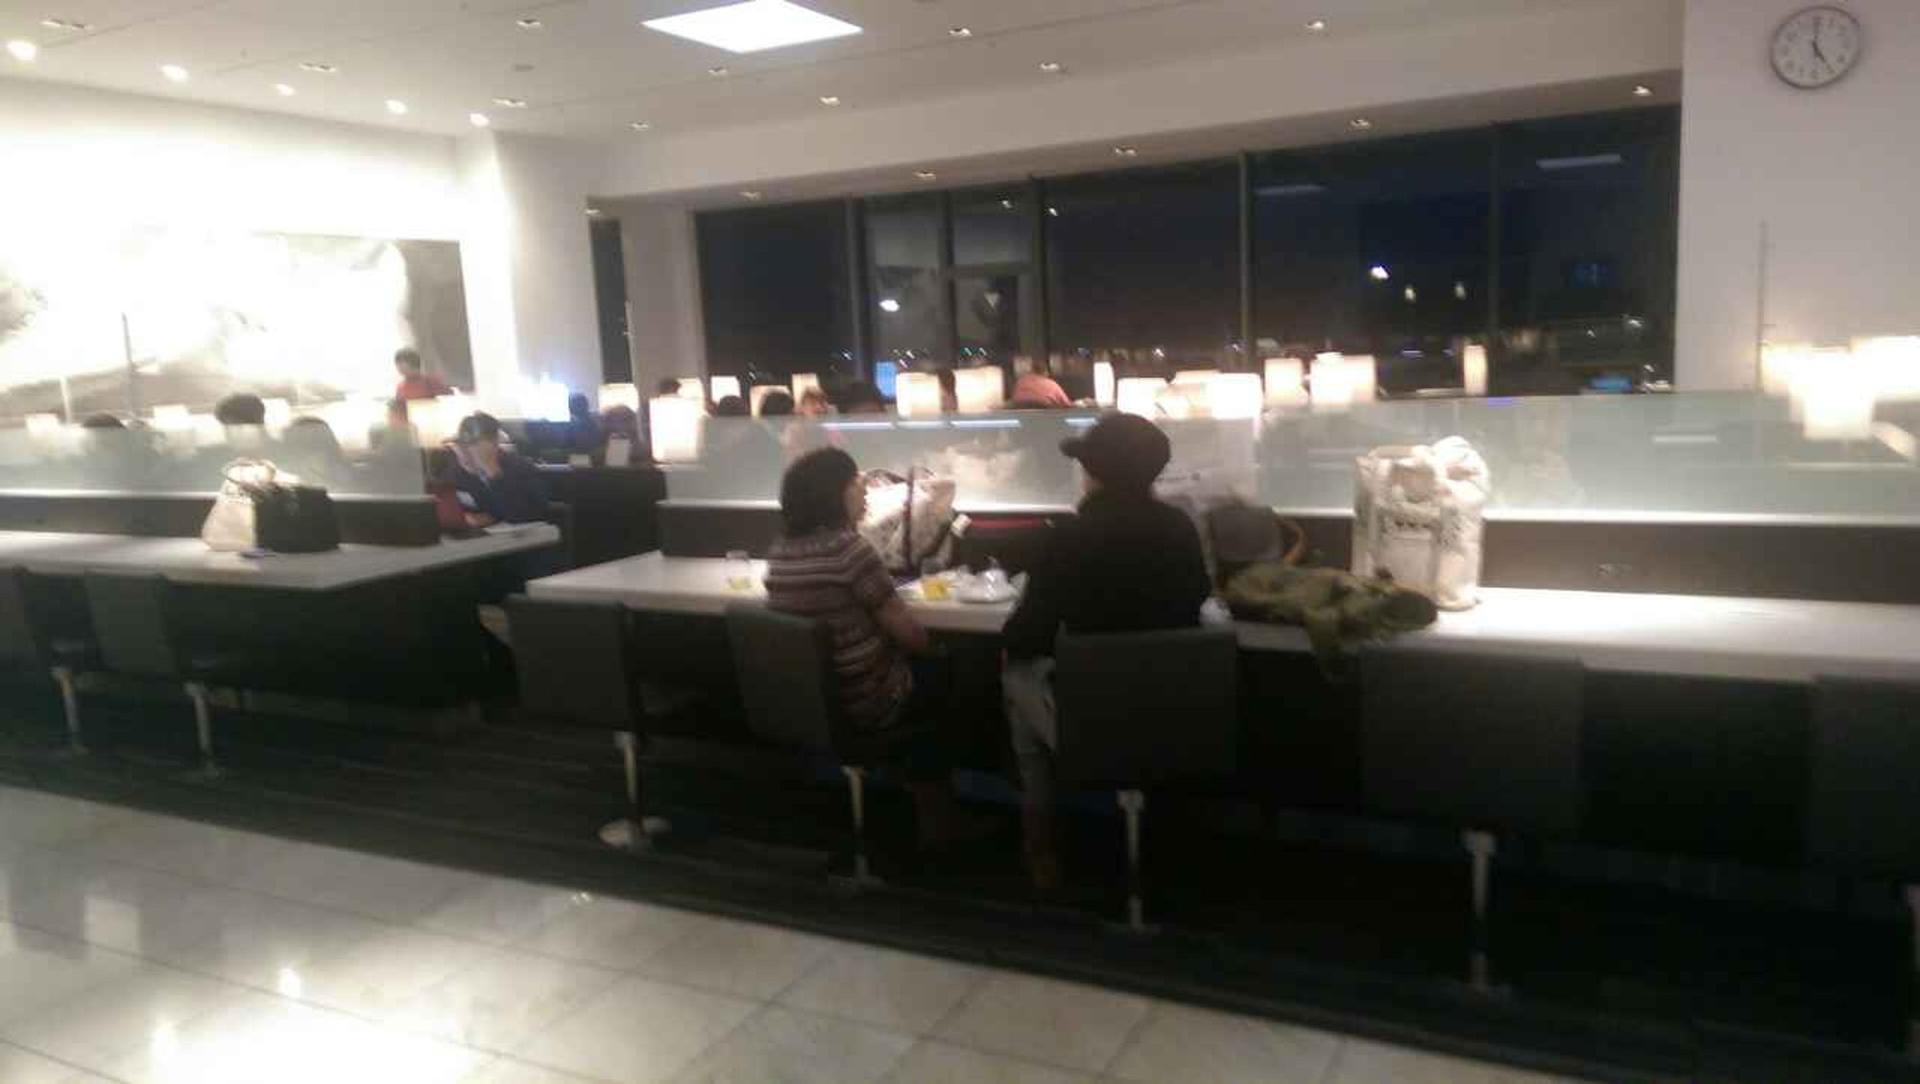 All Nippon Airways ANA Lounge image 8 of 39